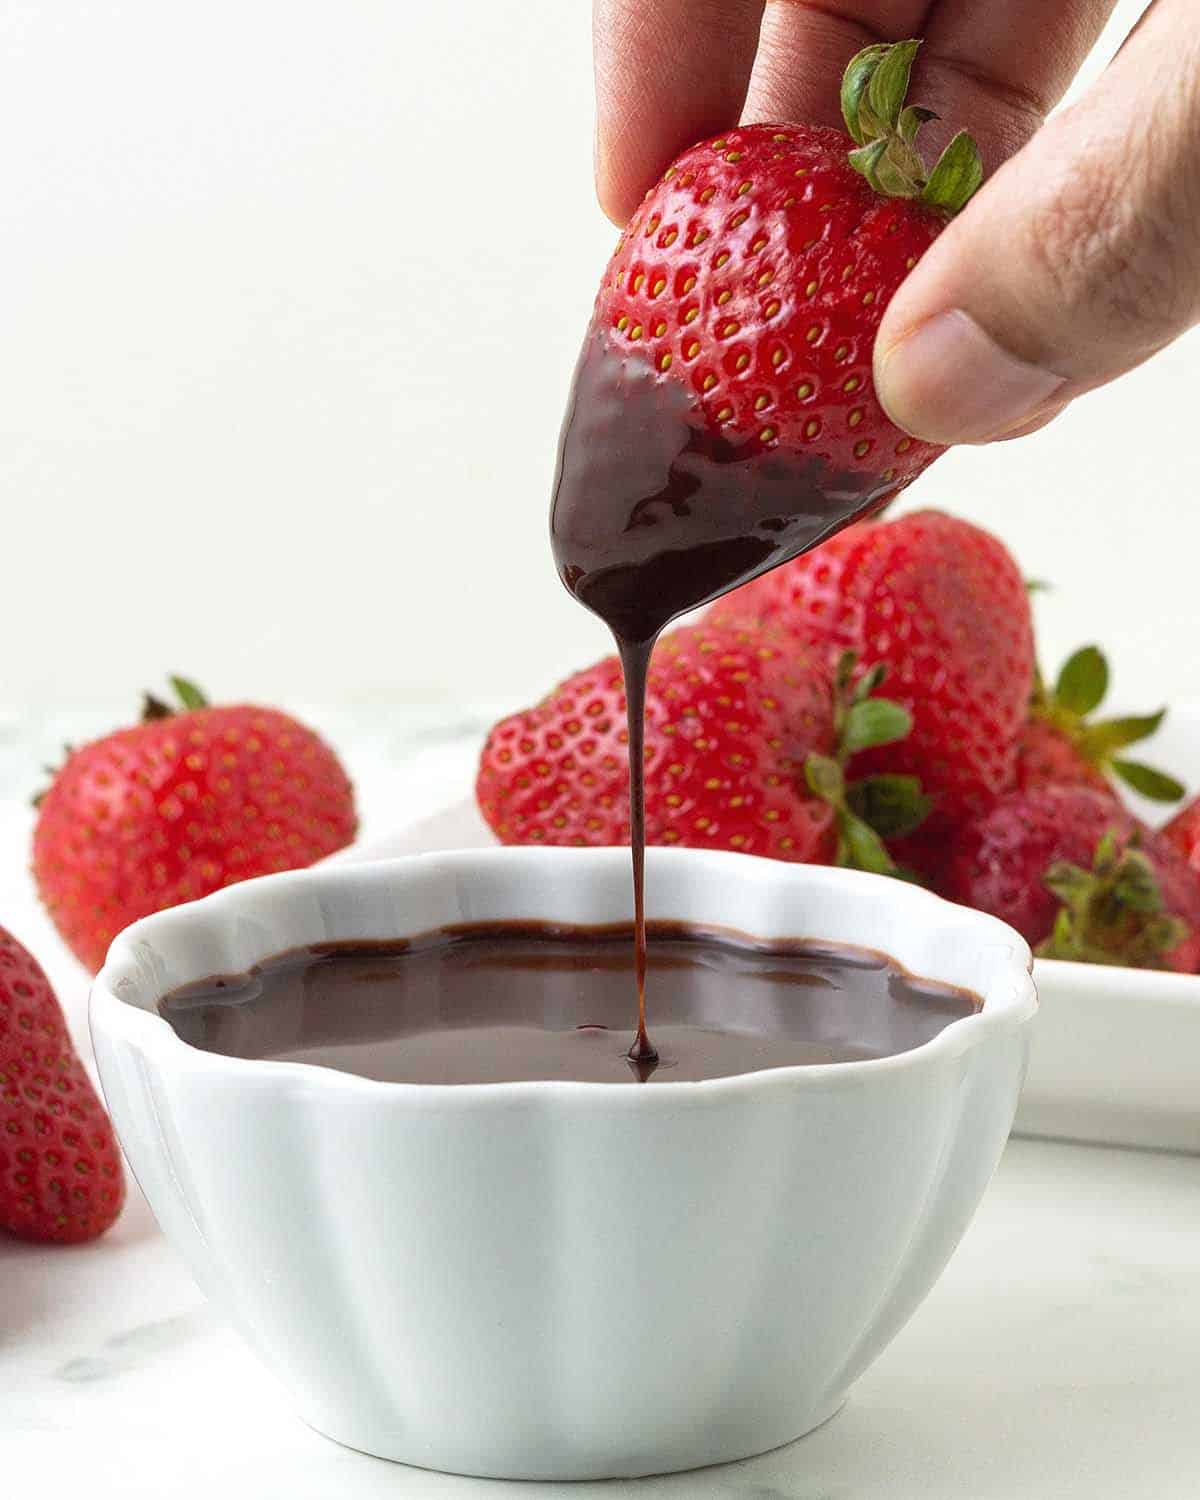 A hand dipping a fresh strawberry into a small bowl of chocolate sauce.